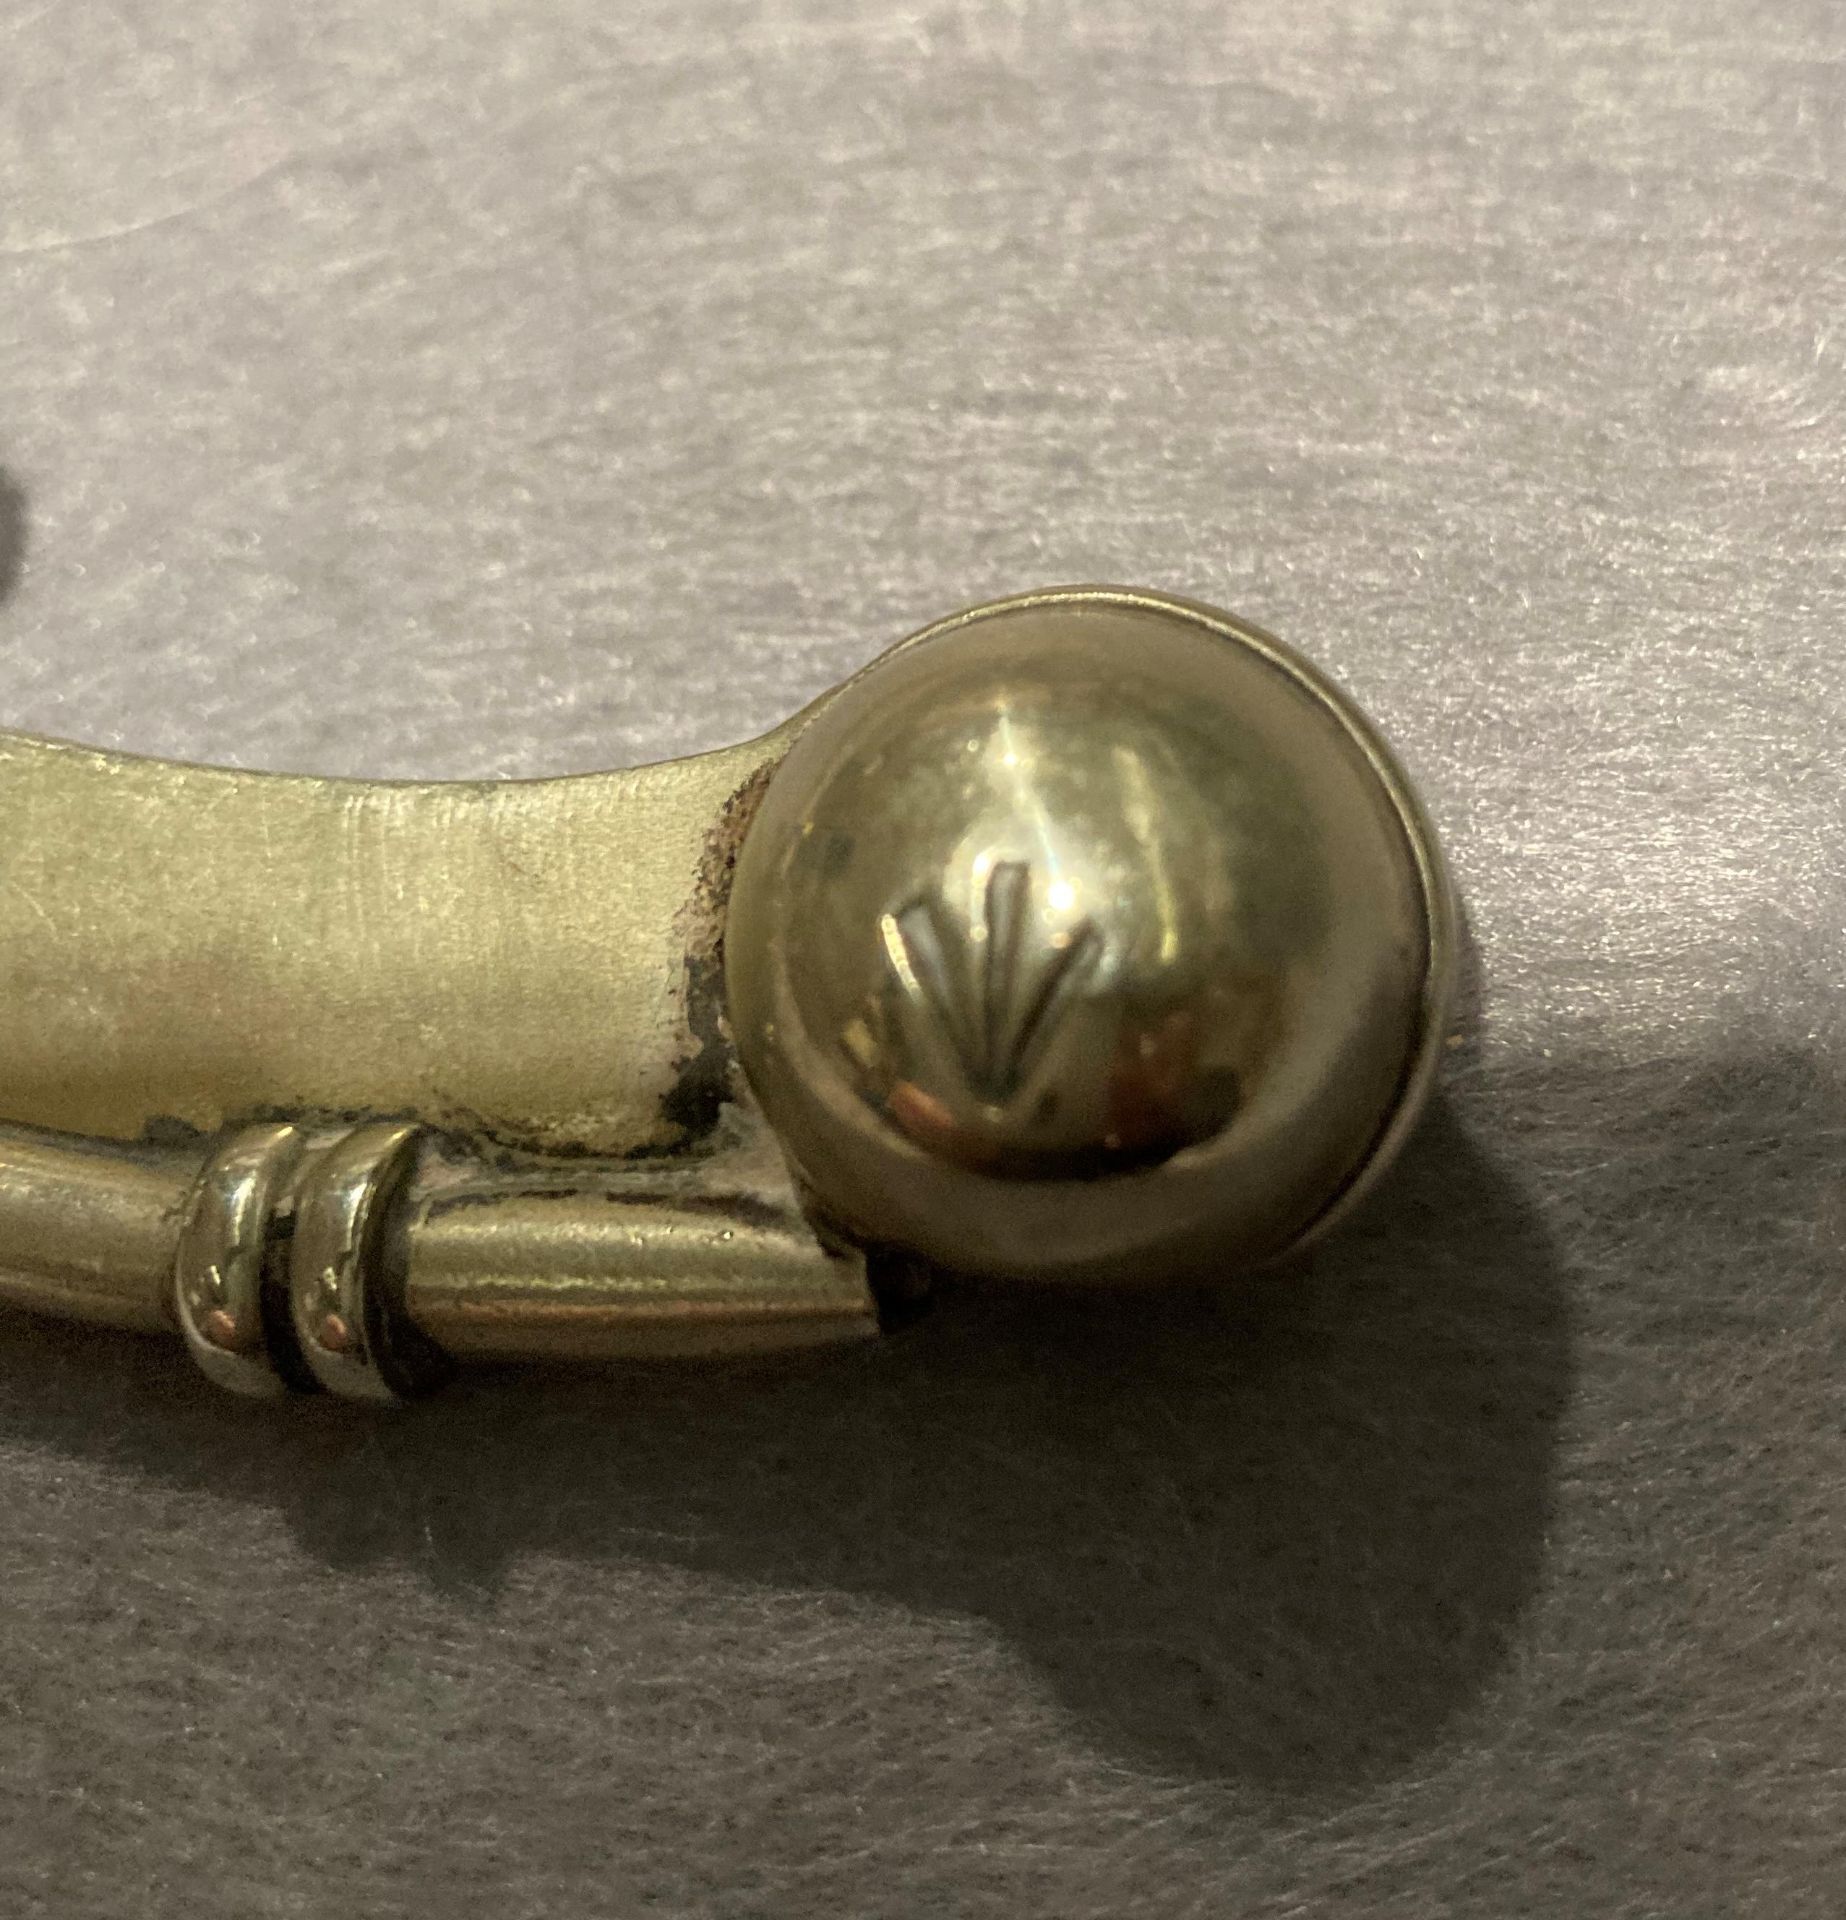 Silver coloured bosun's whistle/boatswain's call on chain (Saleroom location: S3 GC7) - Image 2 of 2